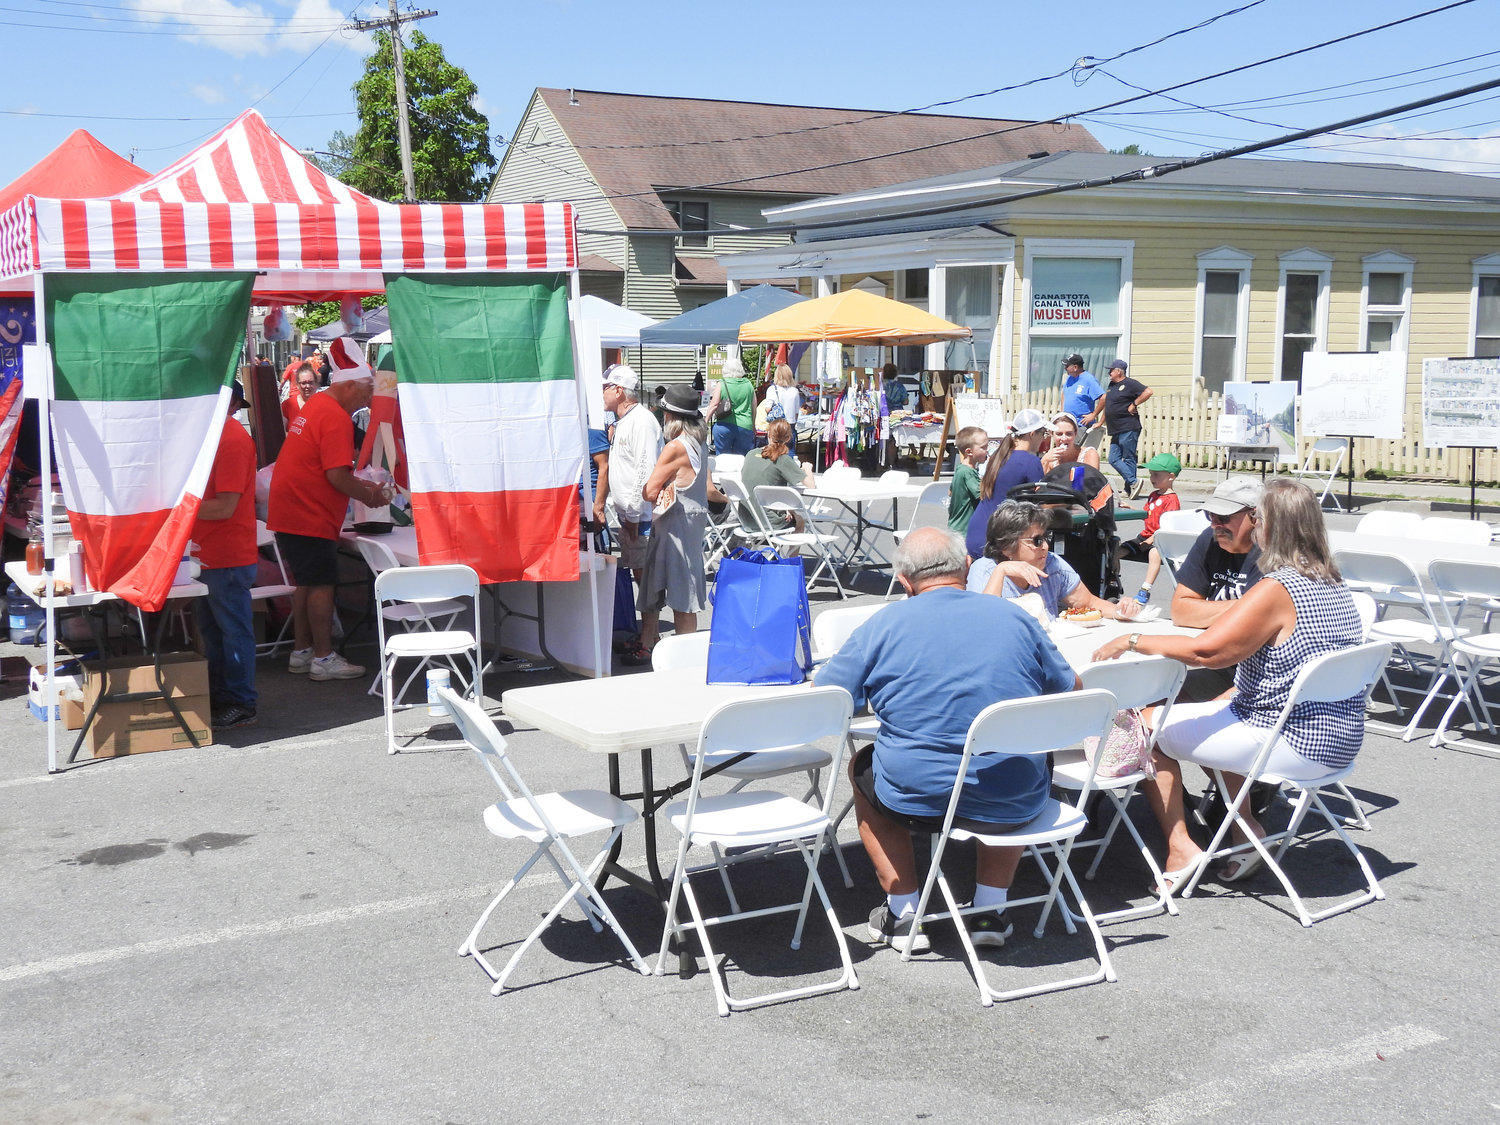 Residents came out for a day of fun and a taste of Italy at the Canastota Italian Heritage Festival on Saturday, Aug. 13.